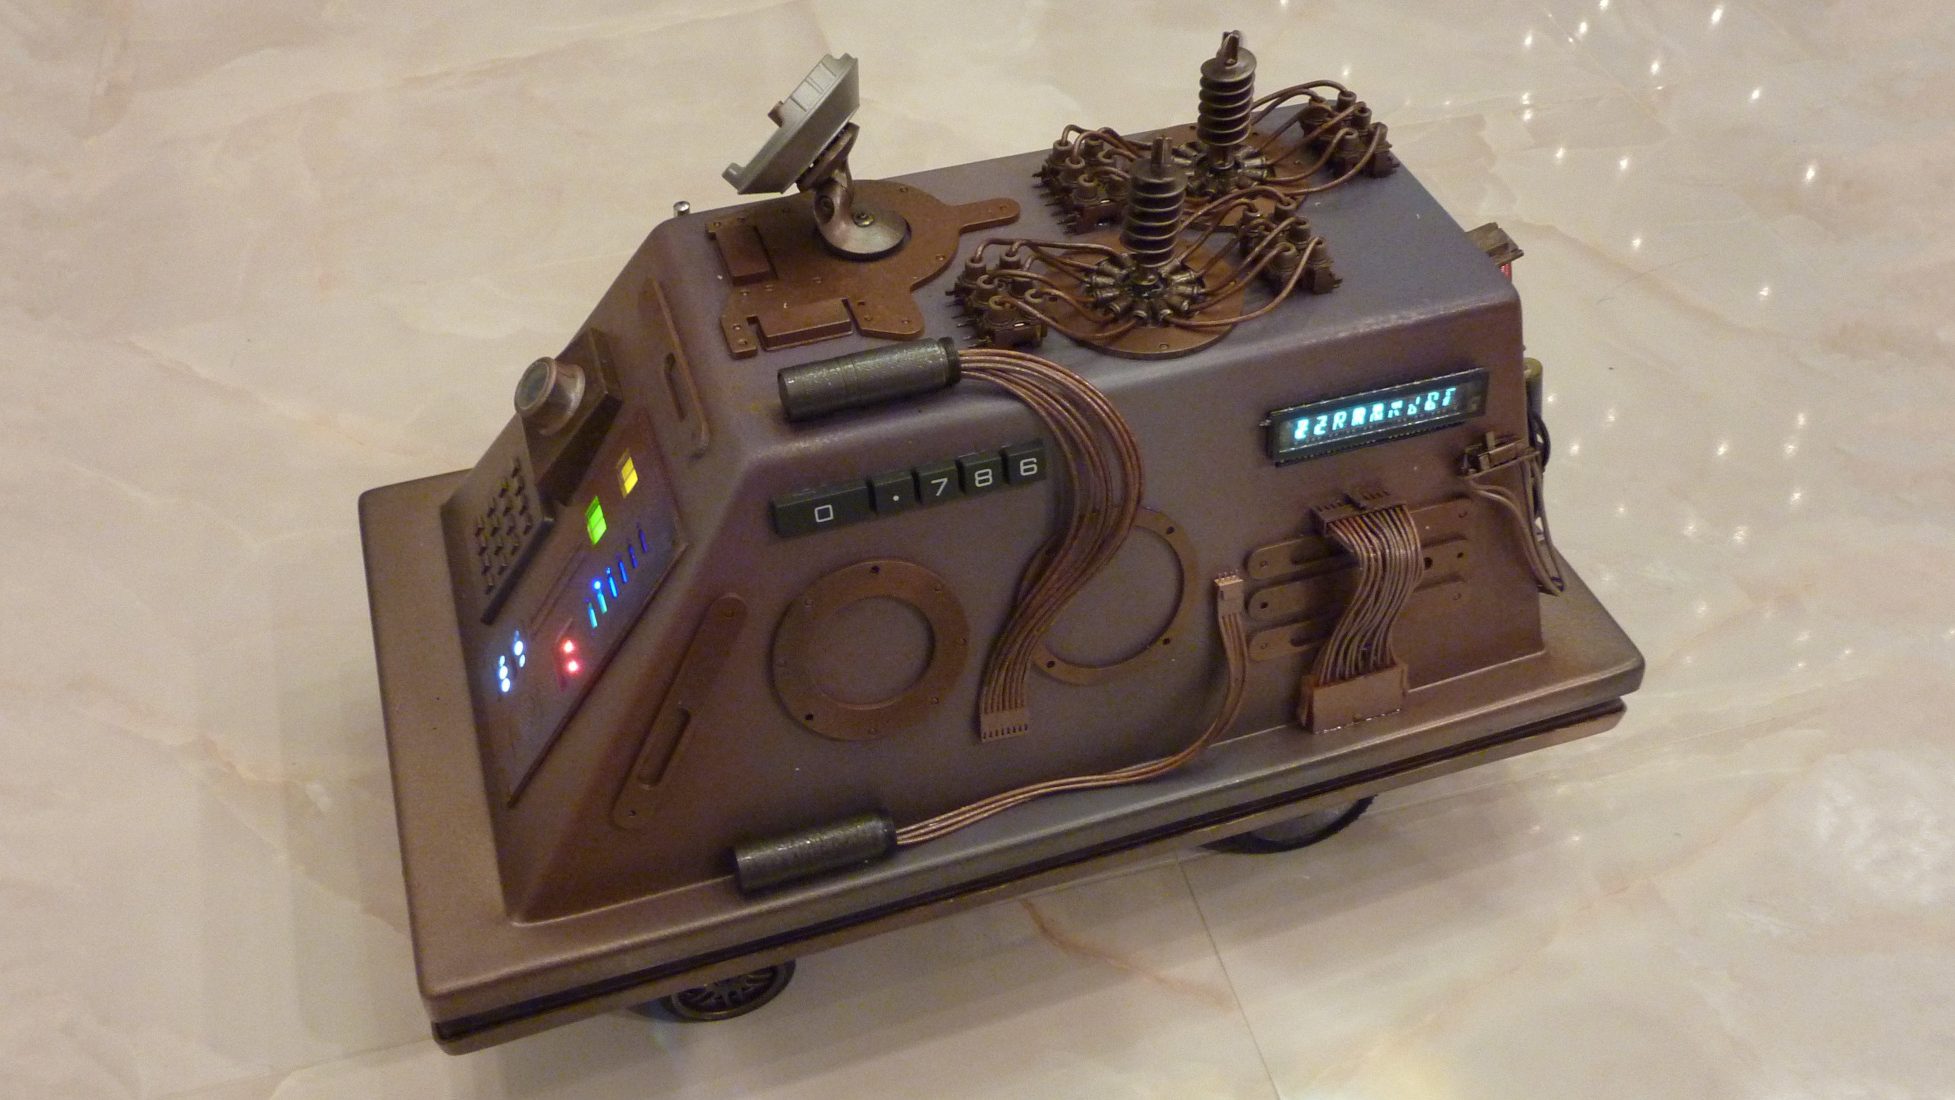 2022 Sci-Fi Contest: A Star Wars Mouse Droid Of Your Very Own